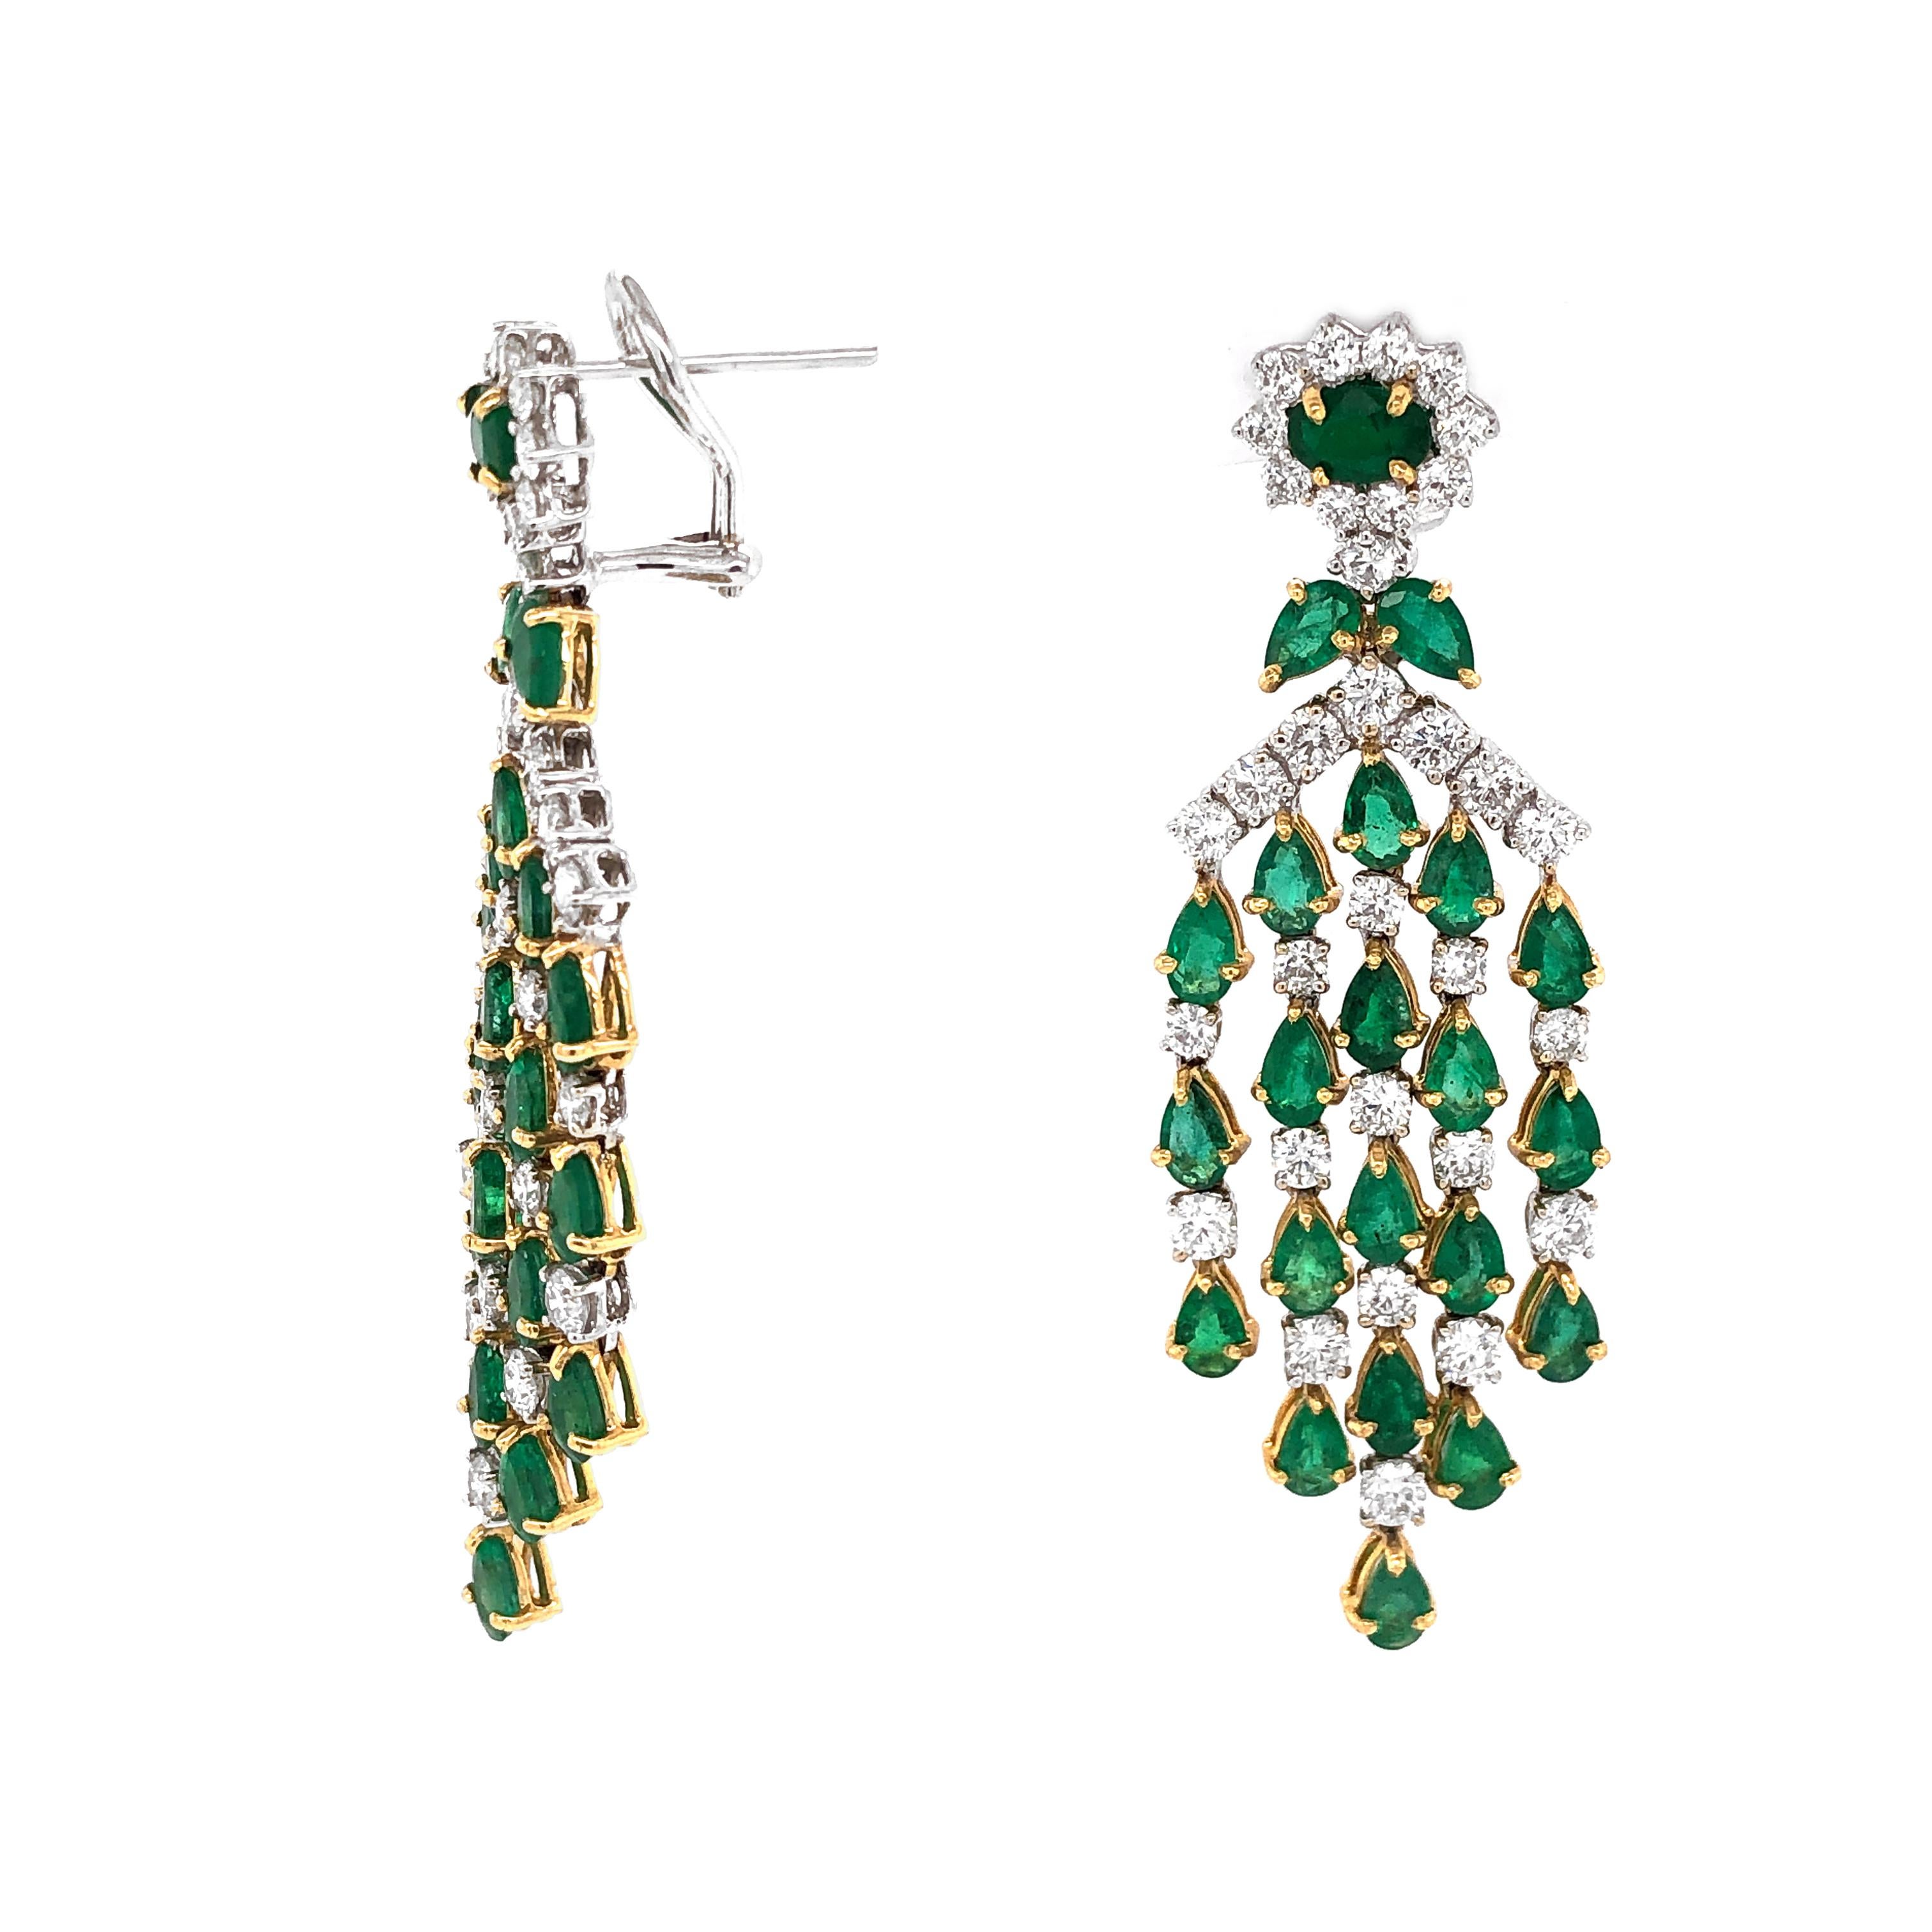 Gorgeous chandelier earrings in 18 Karat gold.
Adorned with Zambian pear cut emeralds in 10.36 carat total. 
Accented by white round diamonds 7.66 carat total.
Diamonds are natural and in G-H Color Clarity VS. 
French / Omega clips.
Vintage and Art